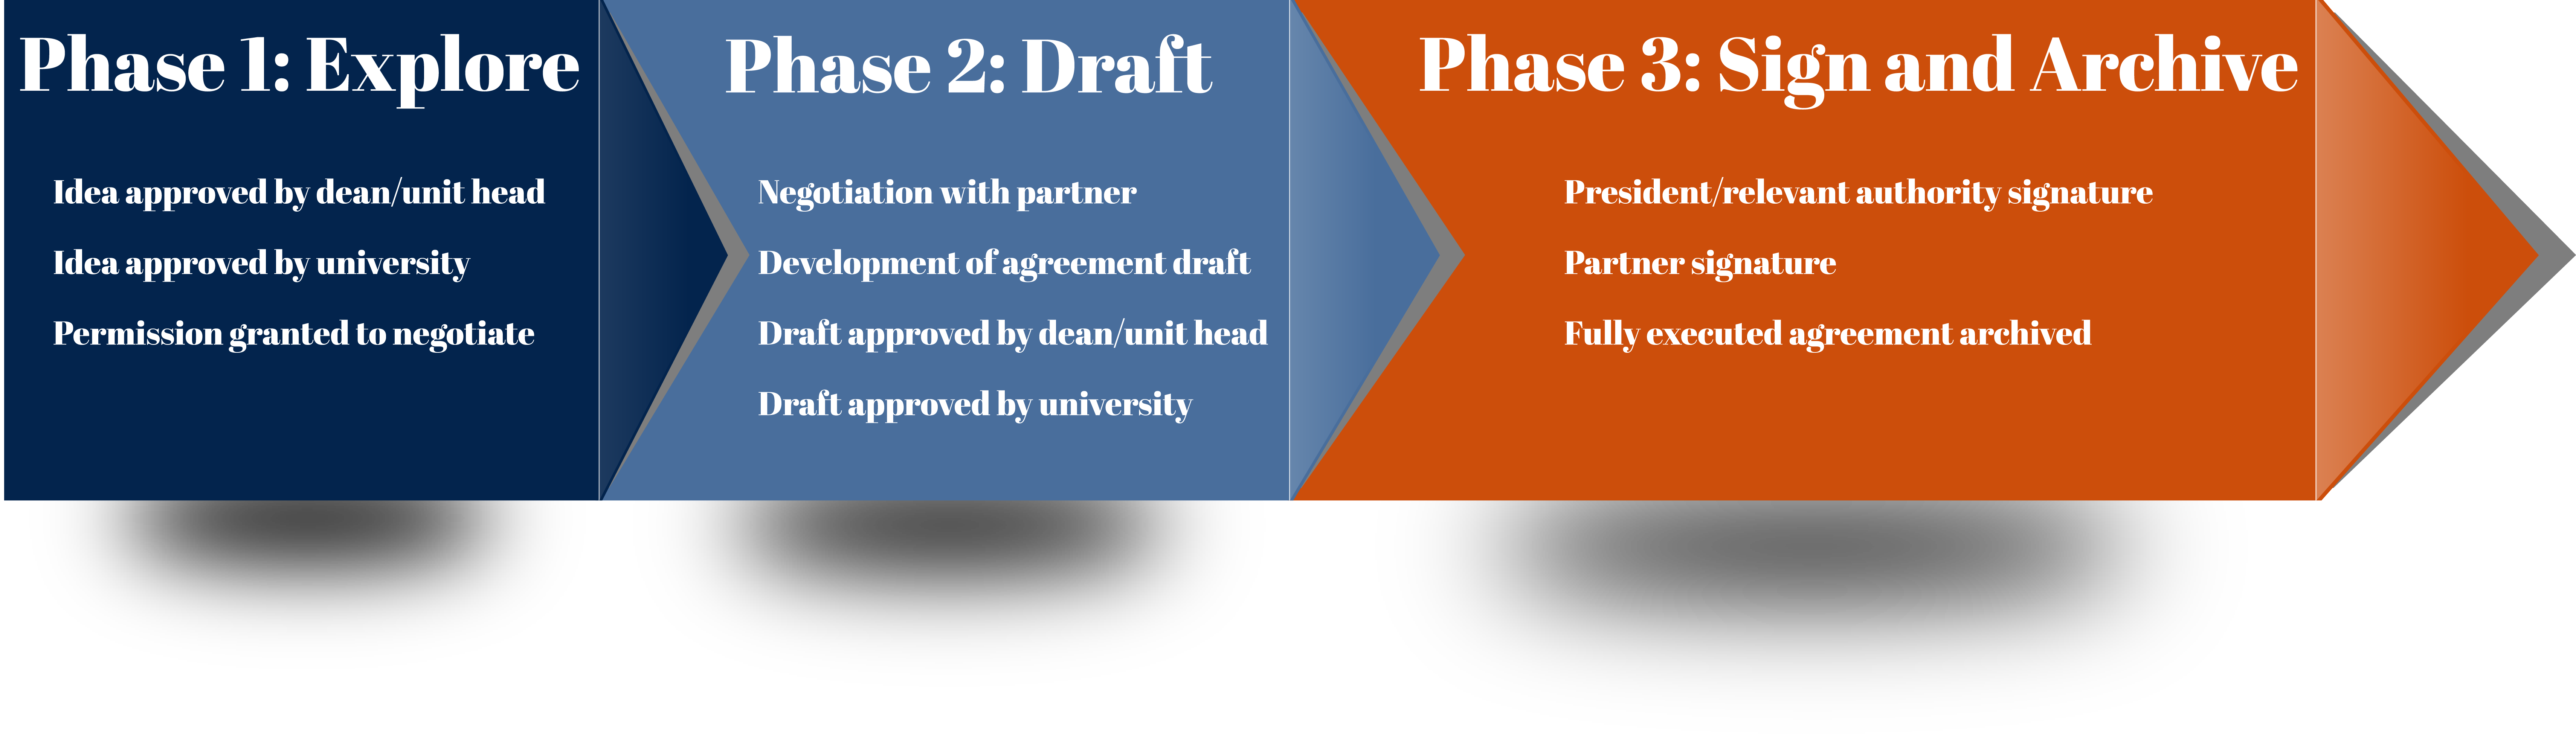 Agreement initiation flow chart. Phase 1: Explore -Idea approved by dean/unit head, then university, then permission granted to negotiate.  Phase 2: Draft -Negotiate with partner, Develop agreement draft, Draft approved by dean/unit head, then university. Phase 3: Sign and Archive -President/relevant authority signature, Partner signature, Fully executed agreement archived.